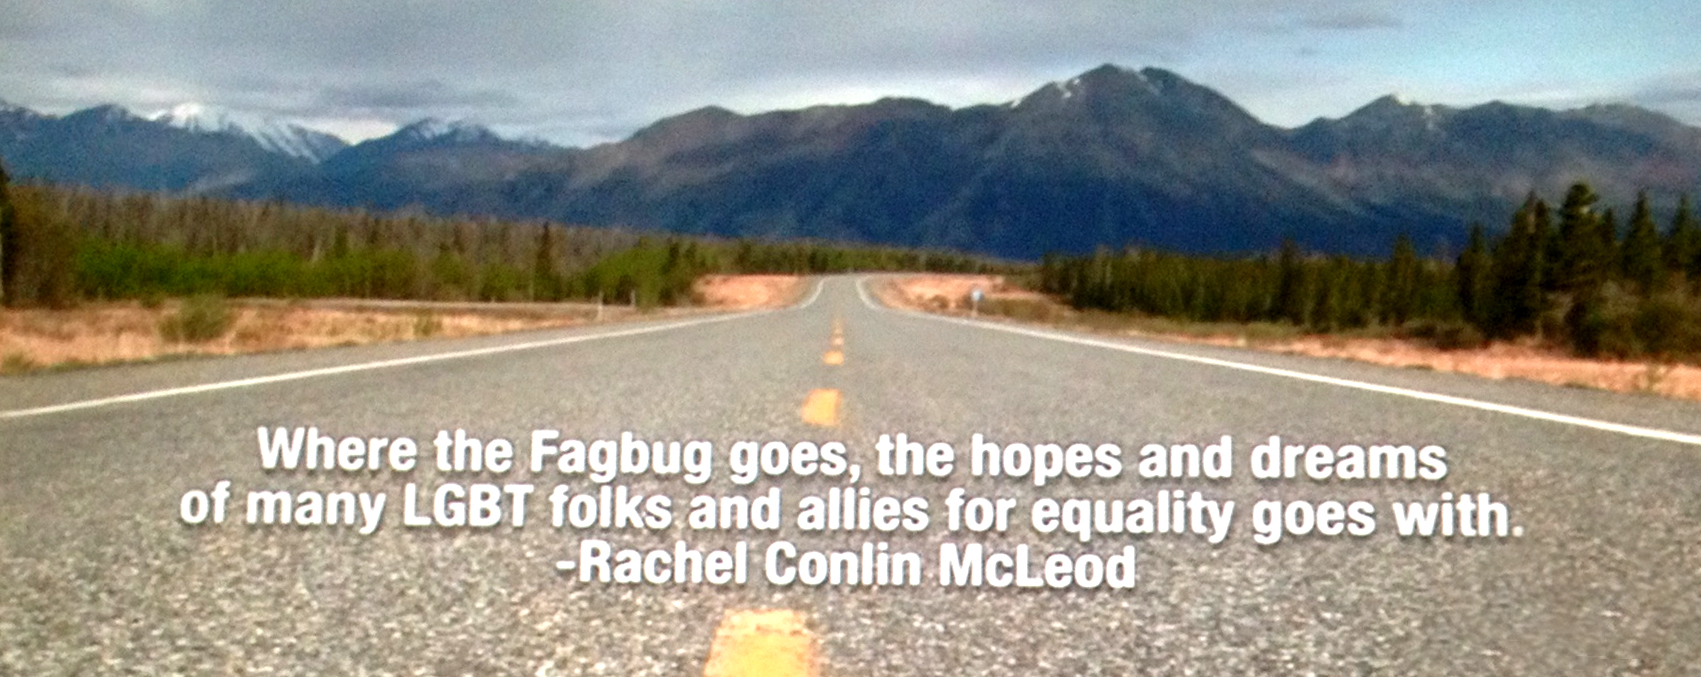 FAGBUG NATION QUOTE